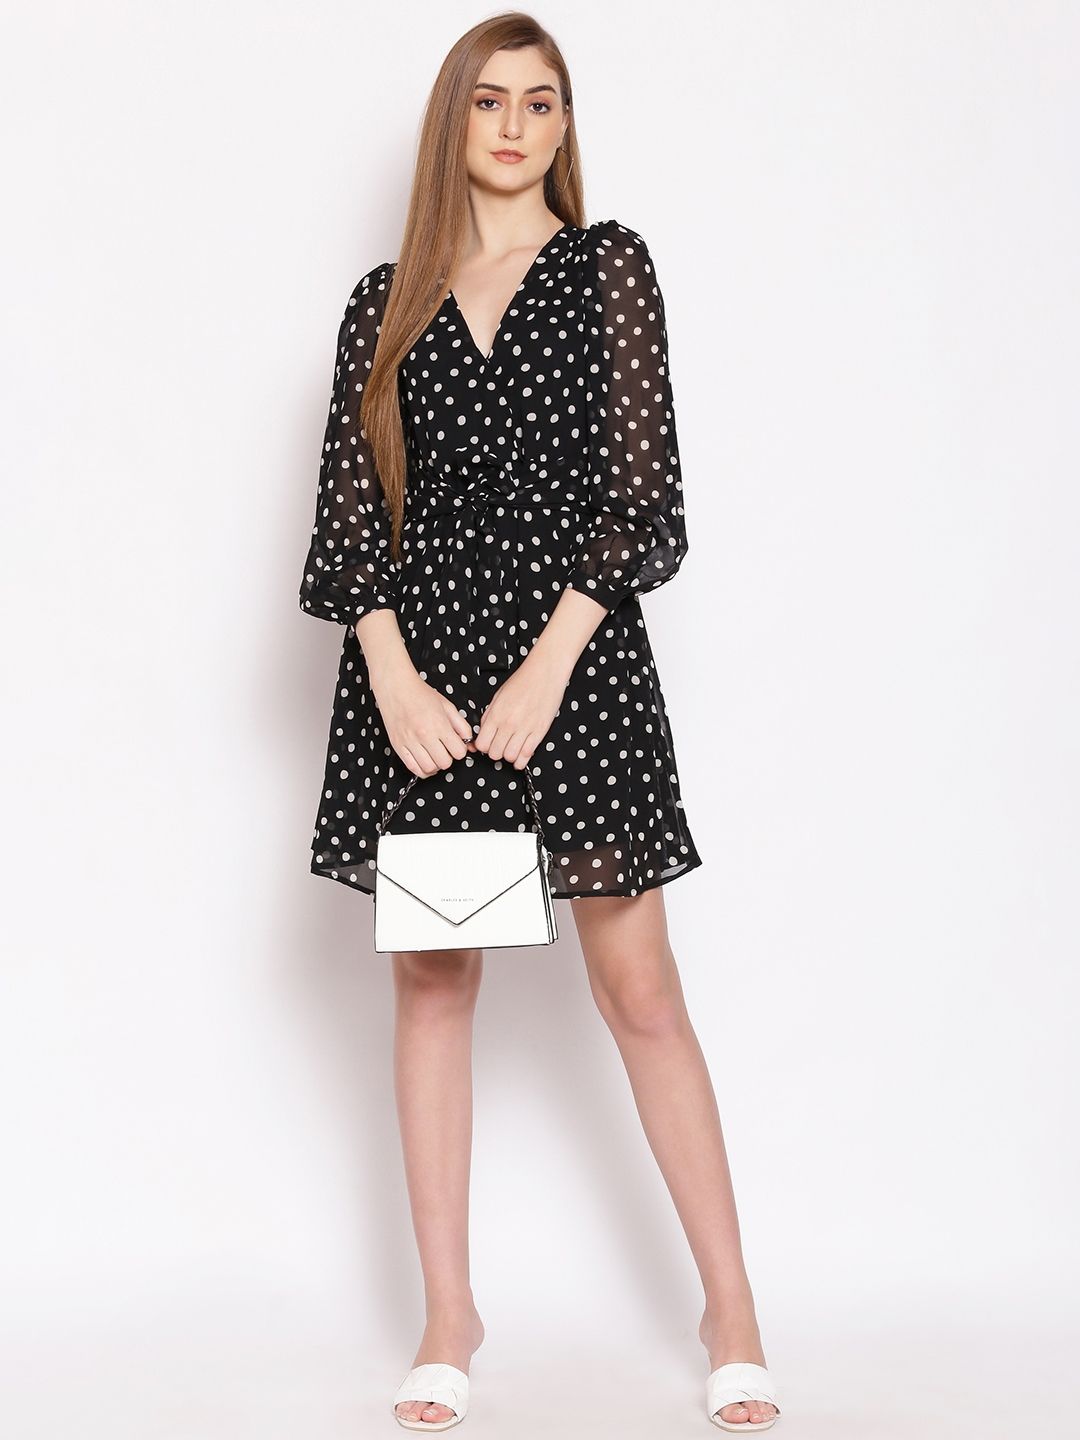 Oxolloxo Black Printed Fit & Flare Dress Price in India